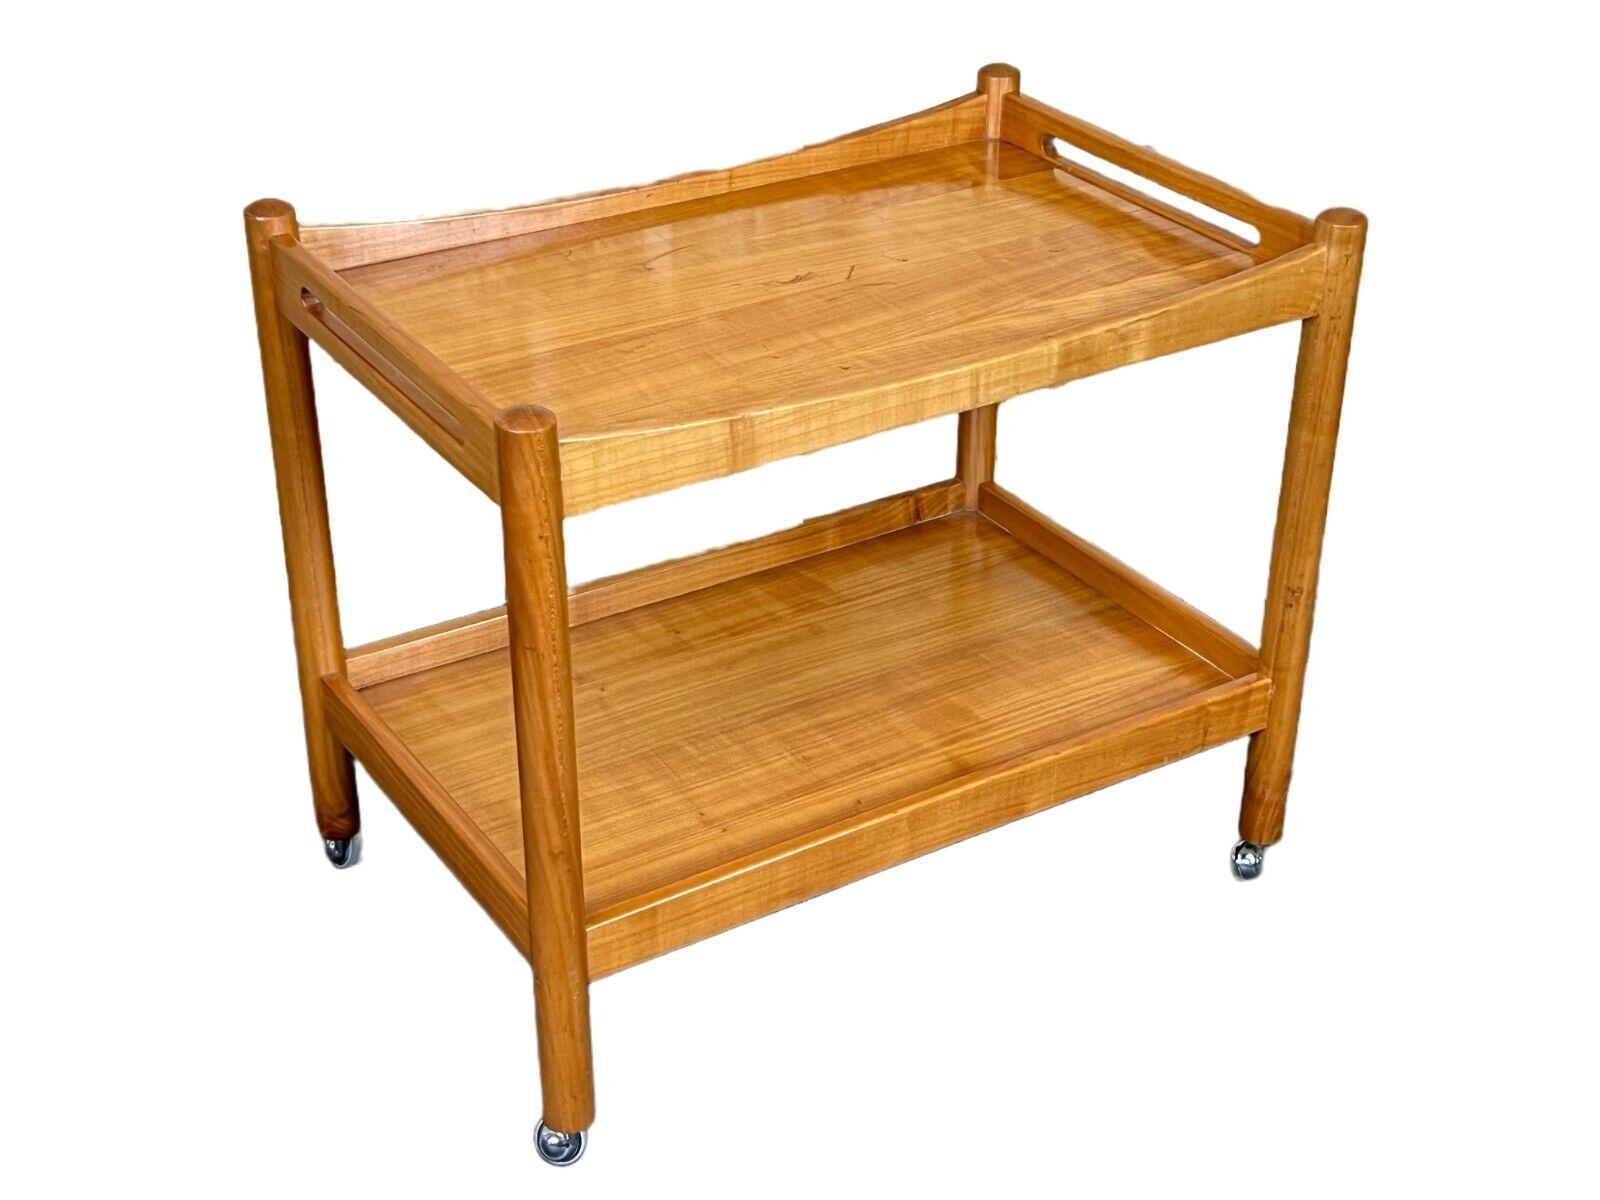 60s 70s Serving trolley side table Danish Modern Design, Denmark.

Object: Serving trolley

Manufacturer:

Condition: good - vintage

Age: around 1960-1970

Dimensions:

Width = 73cm
Depth = 48cm
Height = 63cm

Other notes:

The